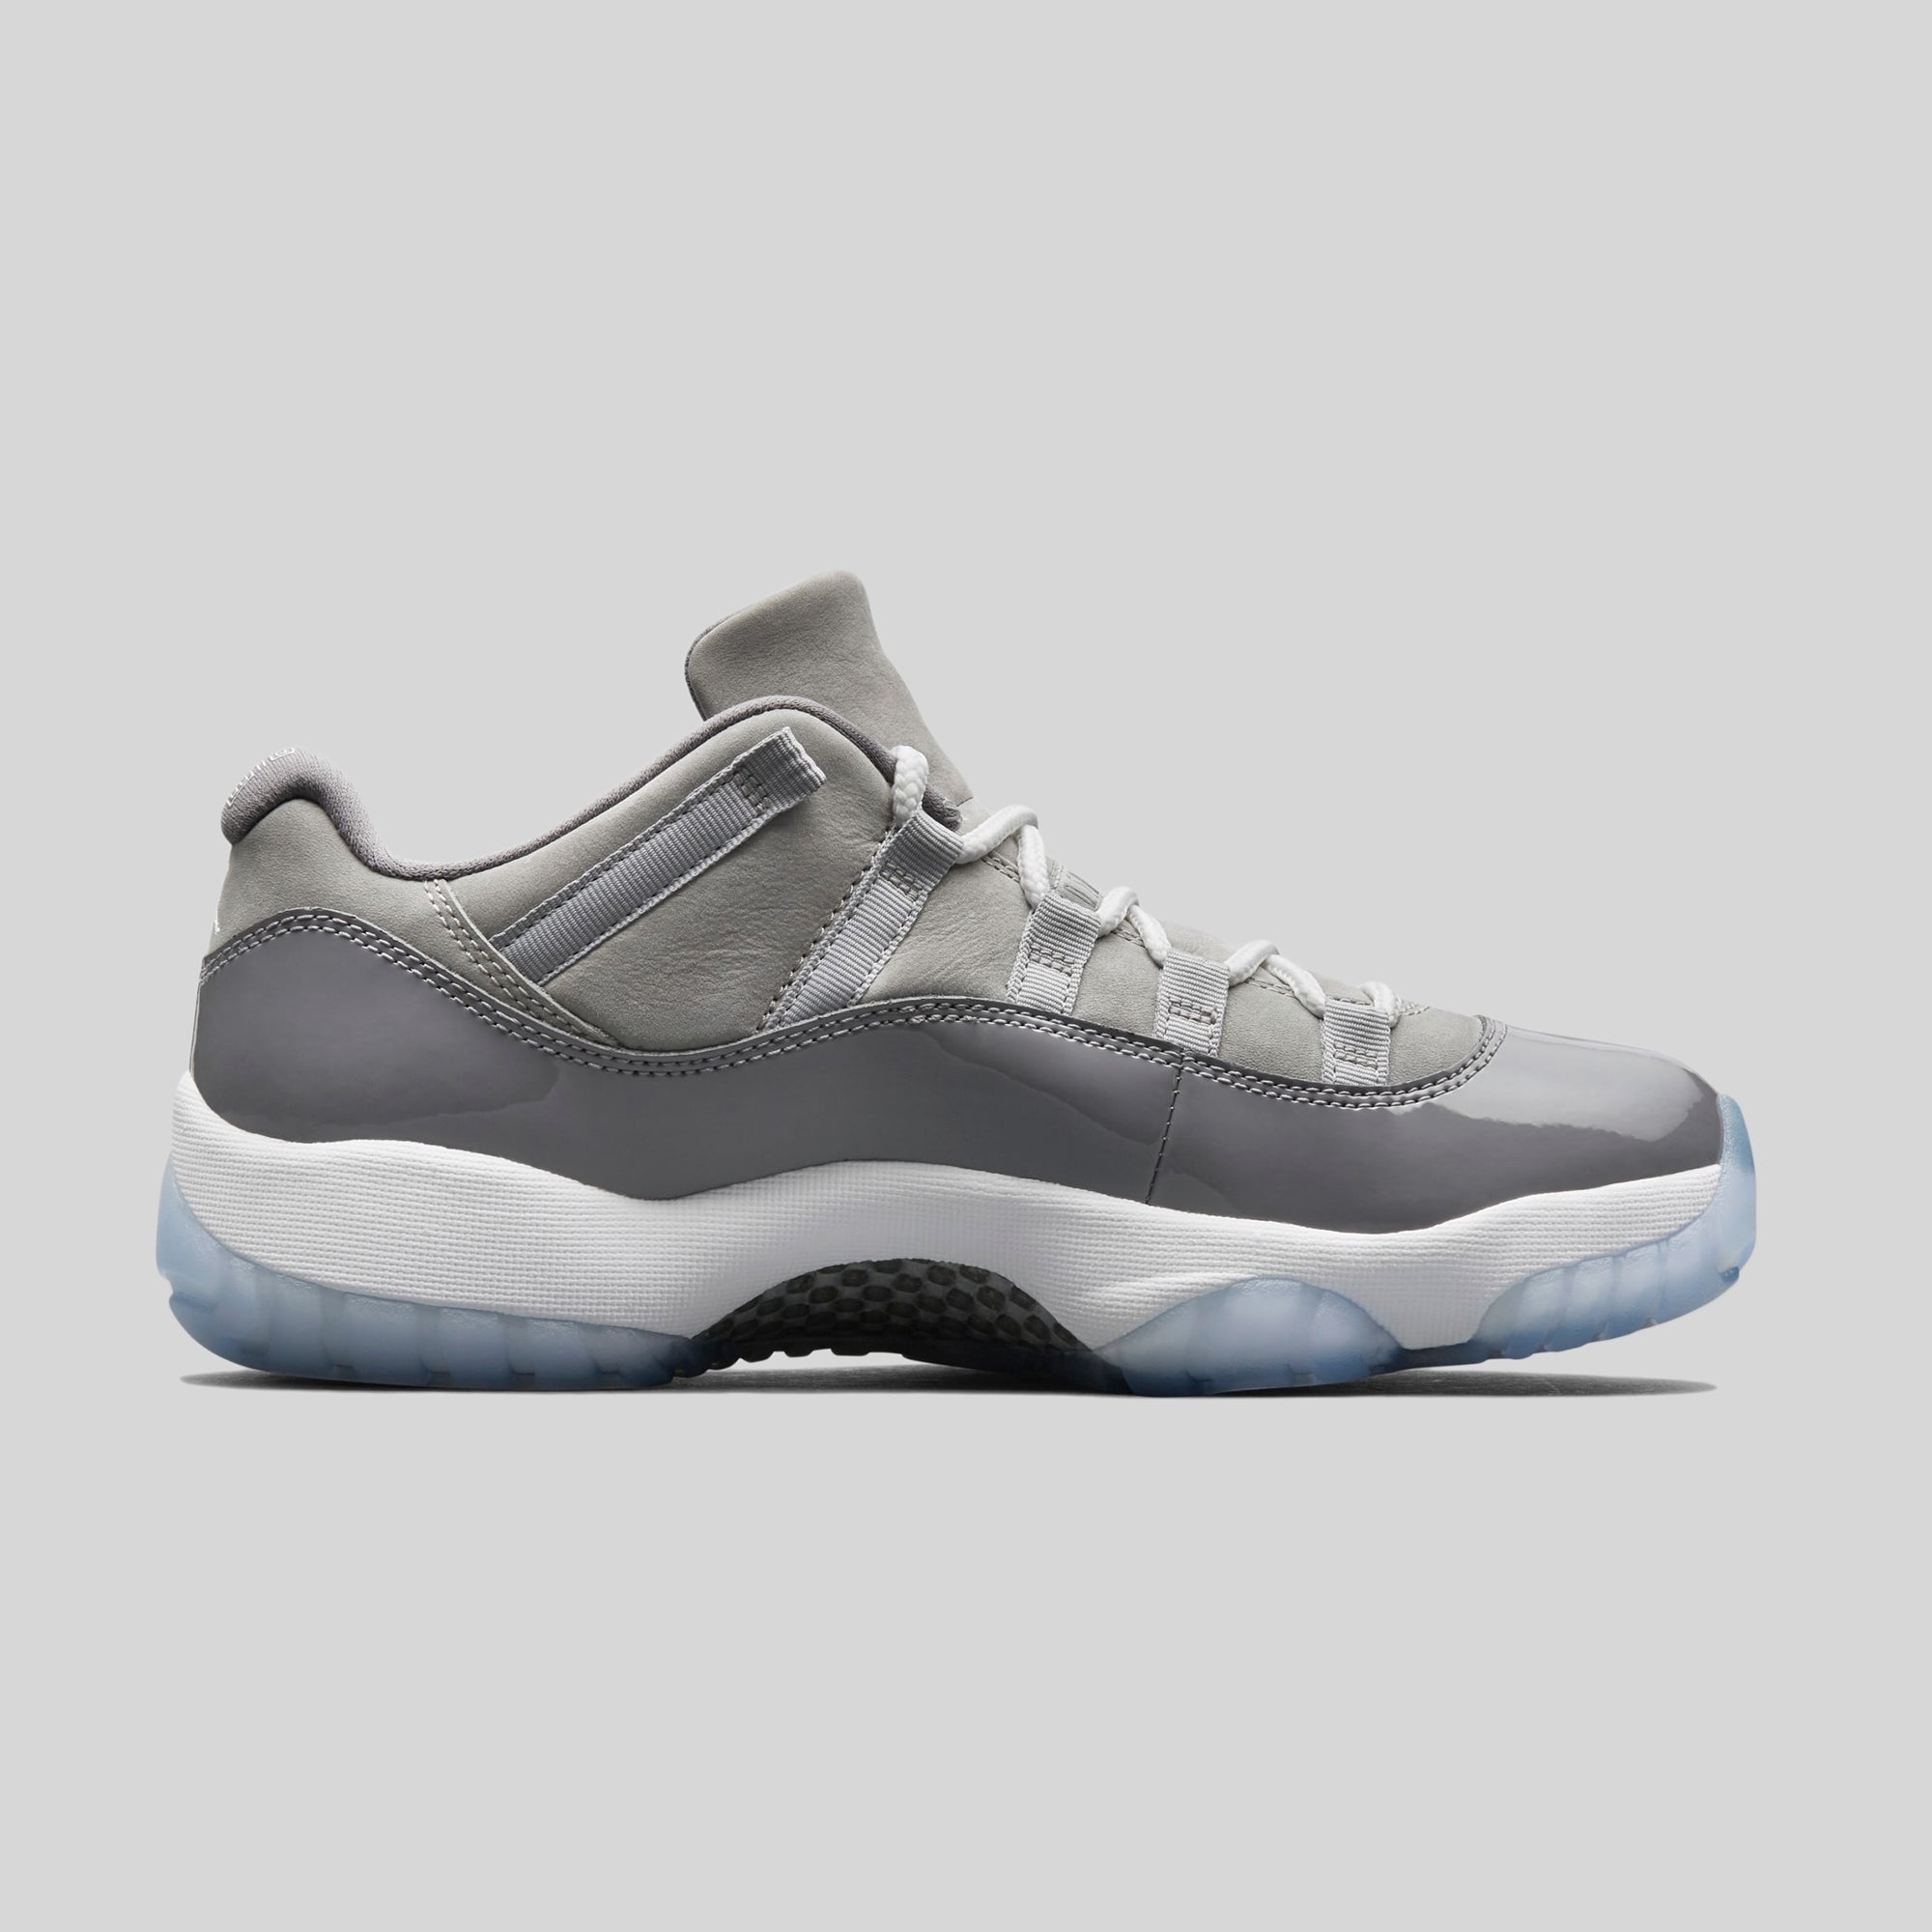 grey and white 11 low